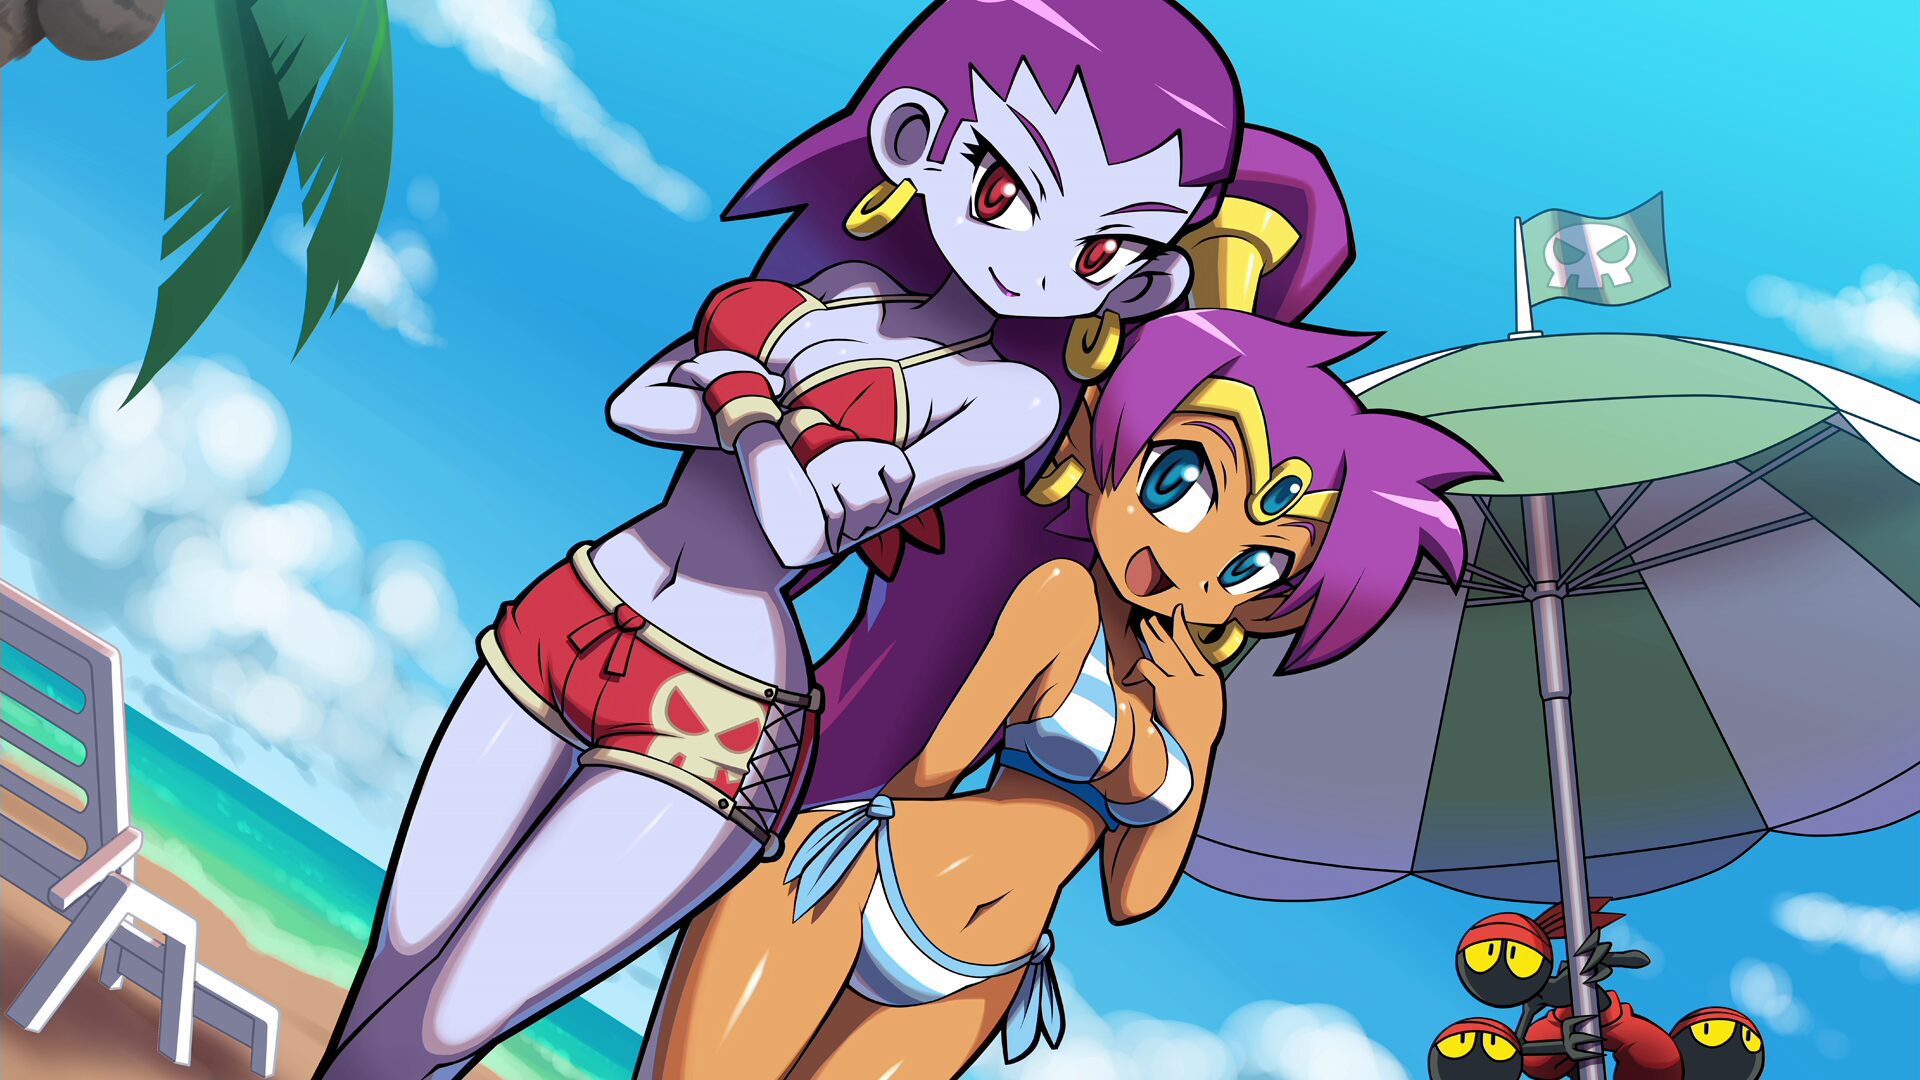 Shantae and the Pirate’s Curse PC Code Giveaway!